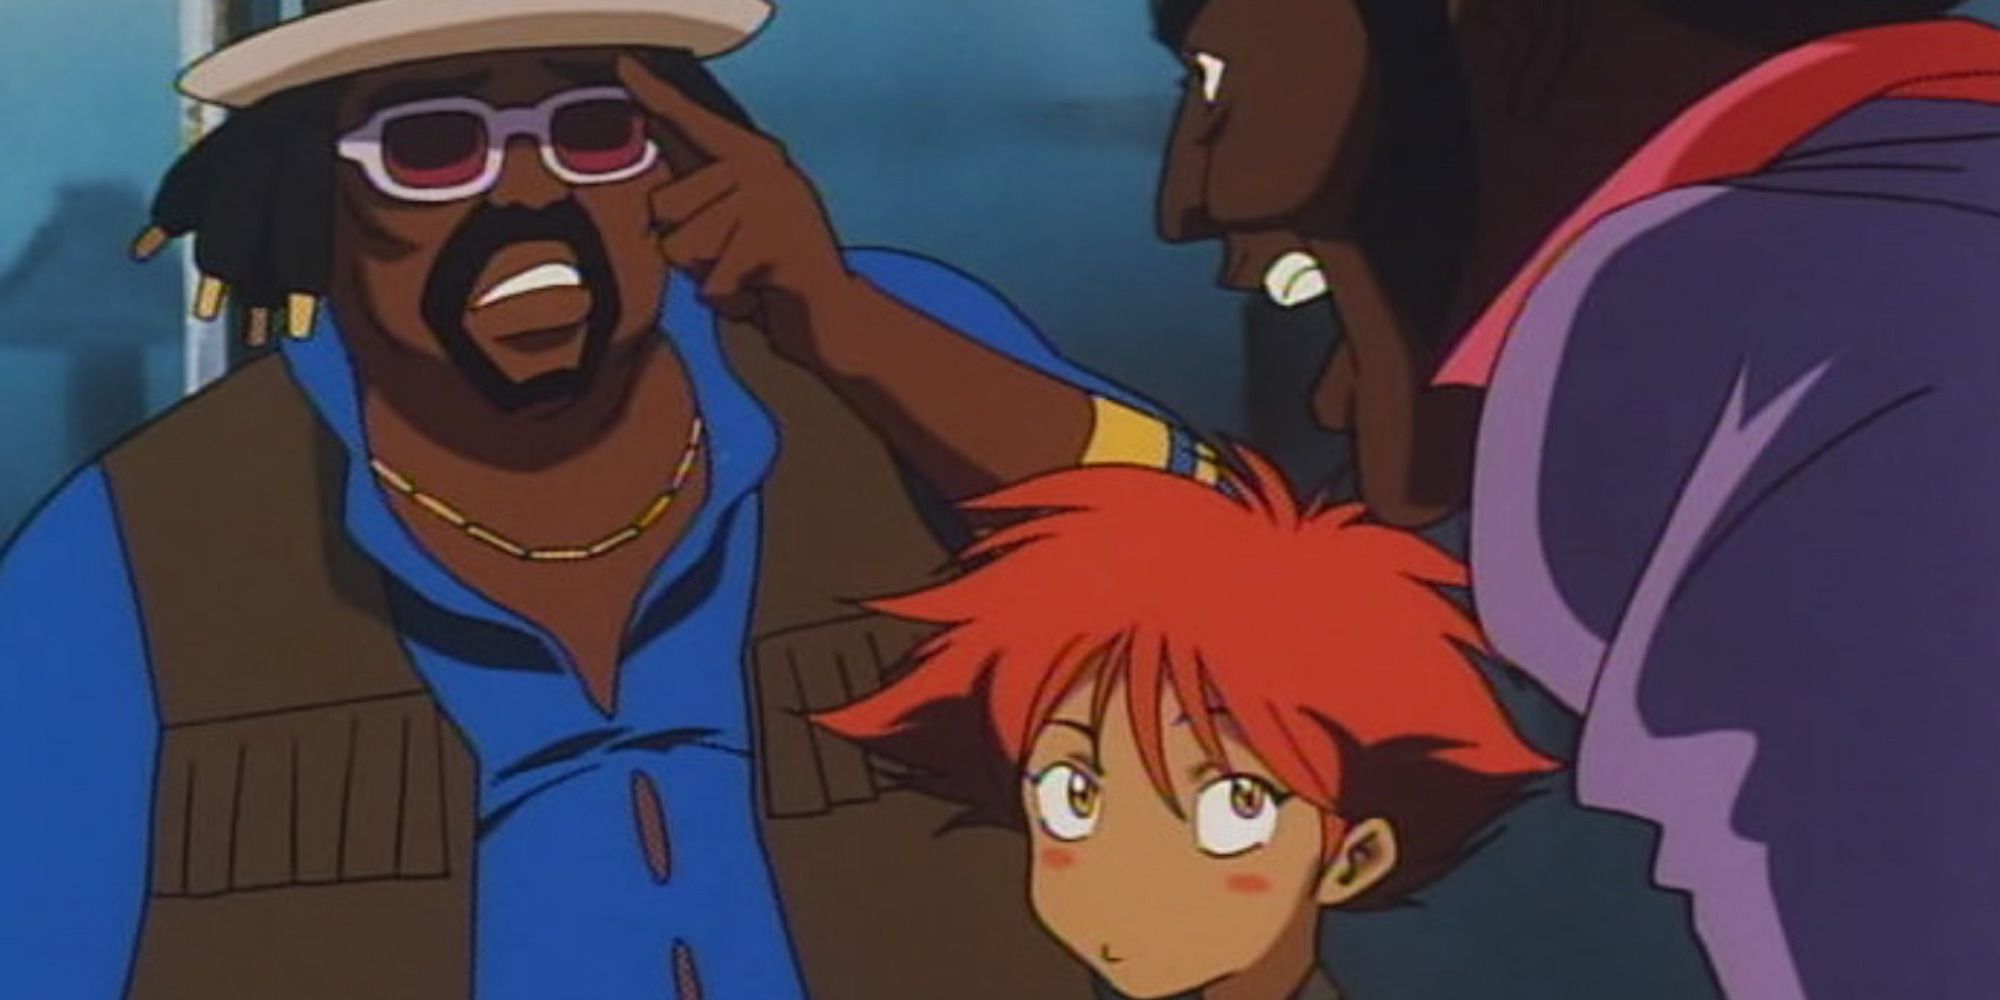 A scene featuring characters from Cowboy Bebop